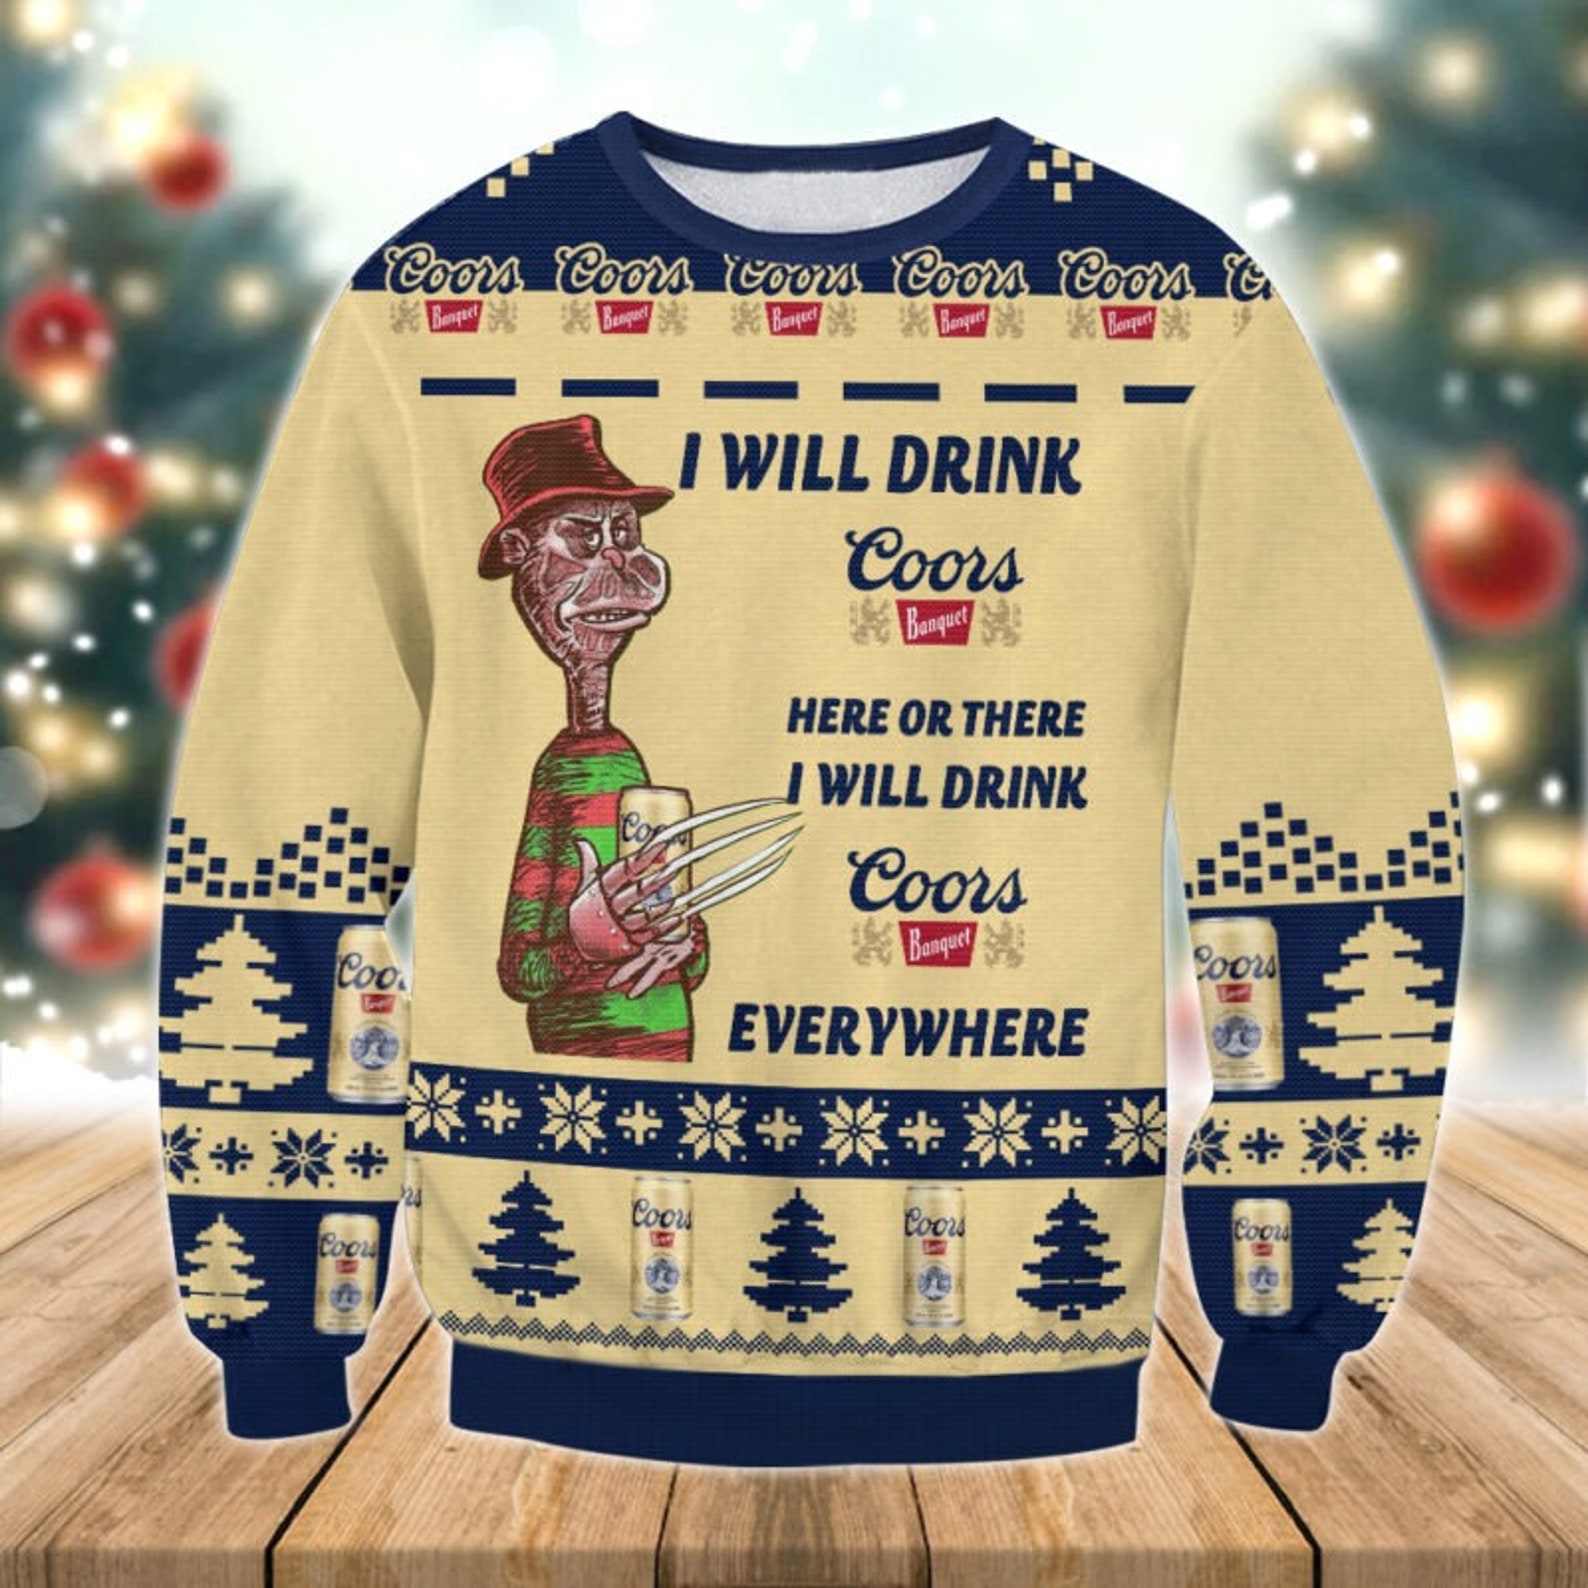 Coors Banquet Drink Everywhere Ugly Sweater - Unique Christmas Gift for Beer Enthusiasts